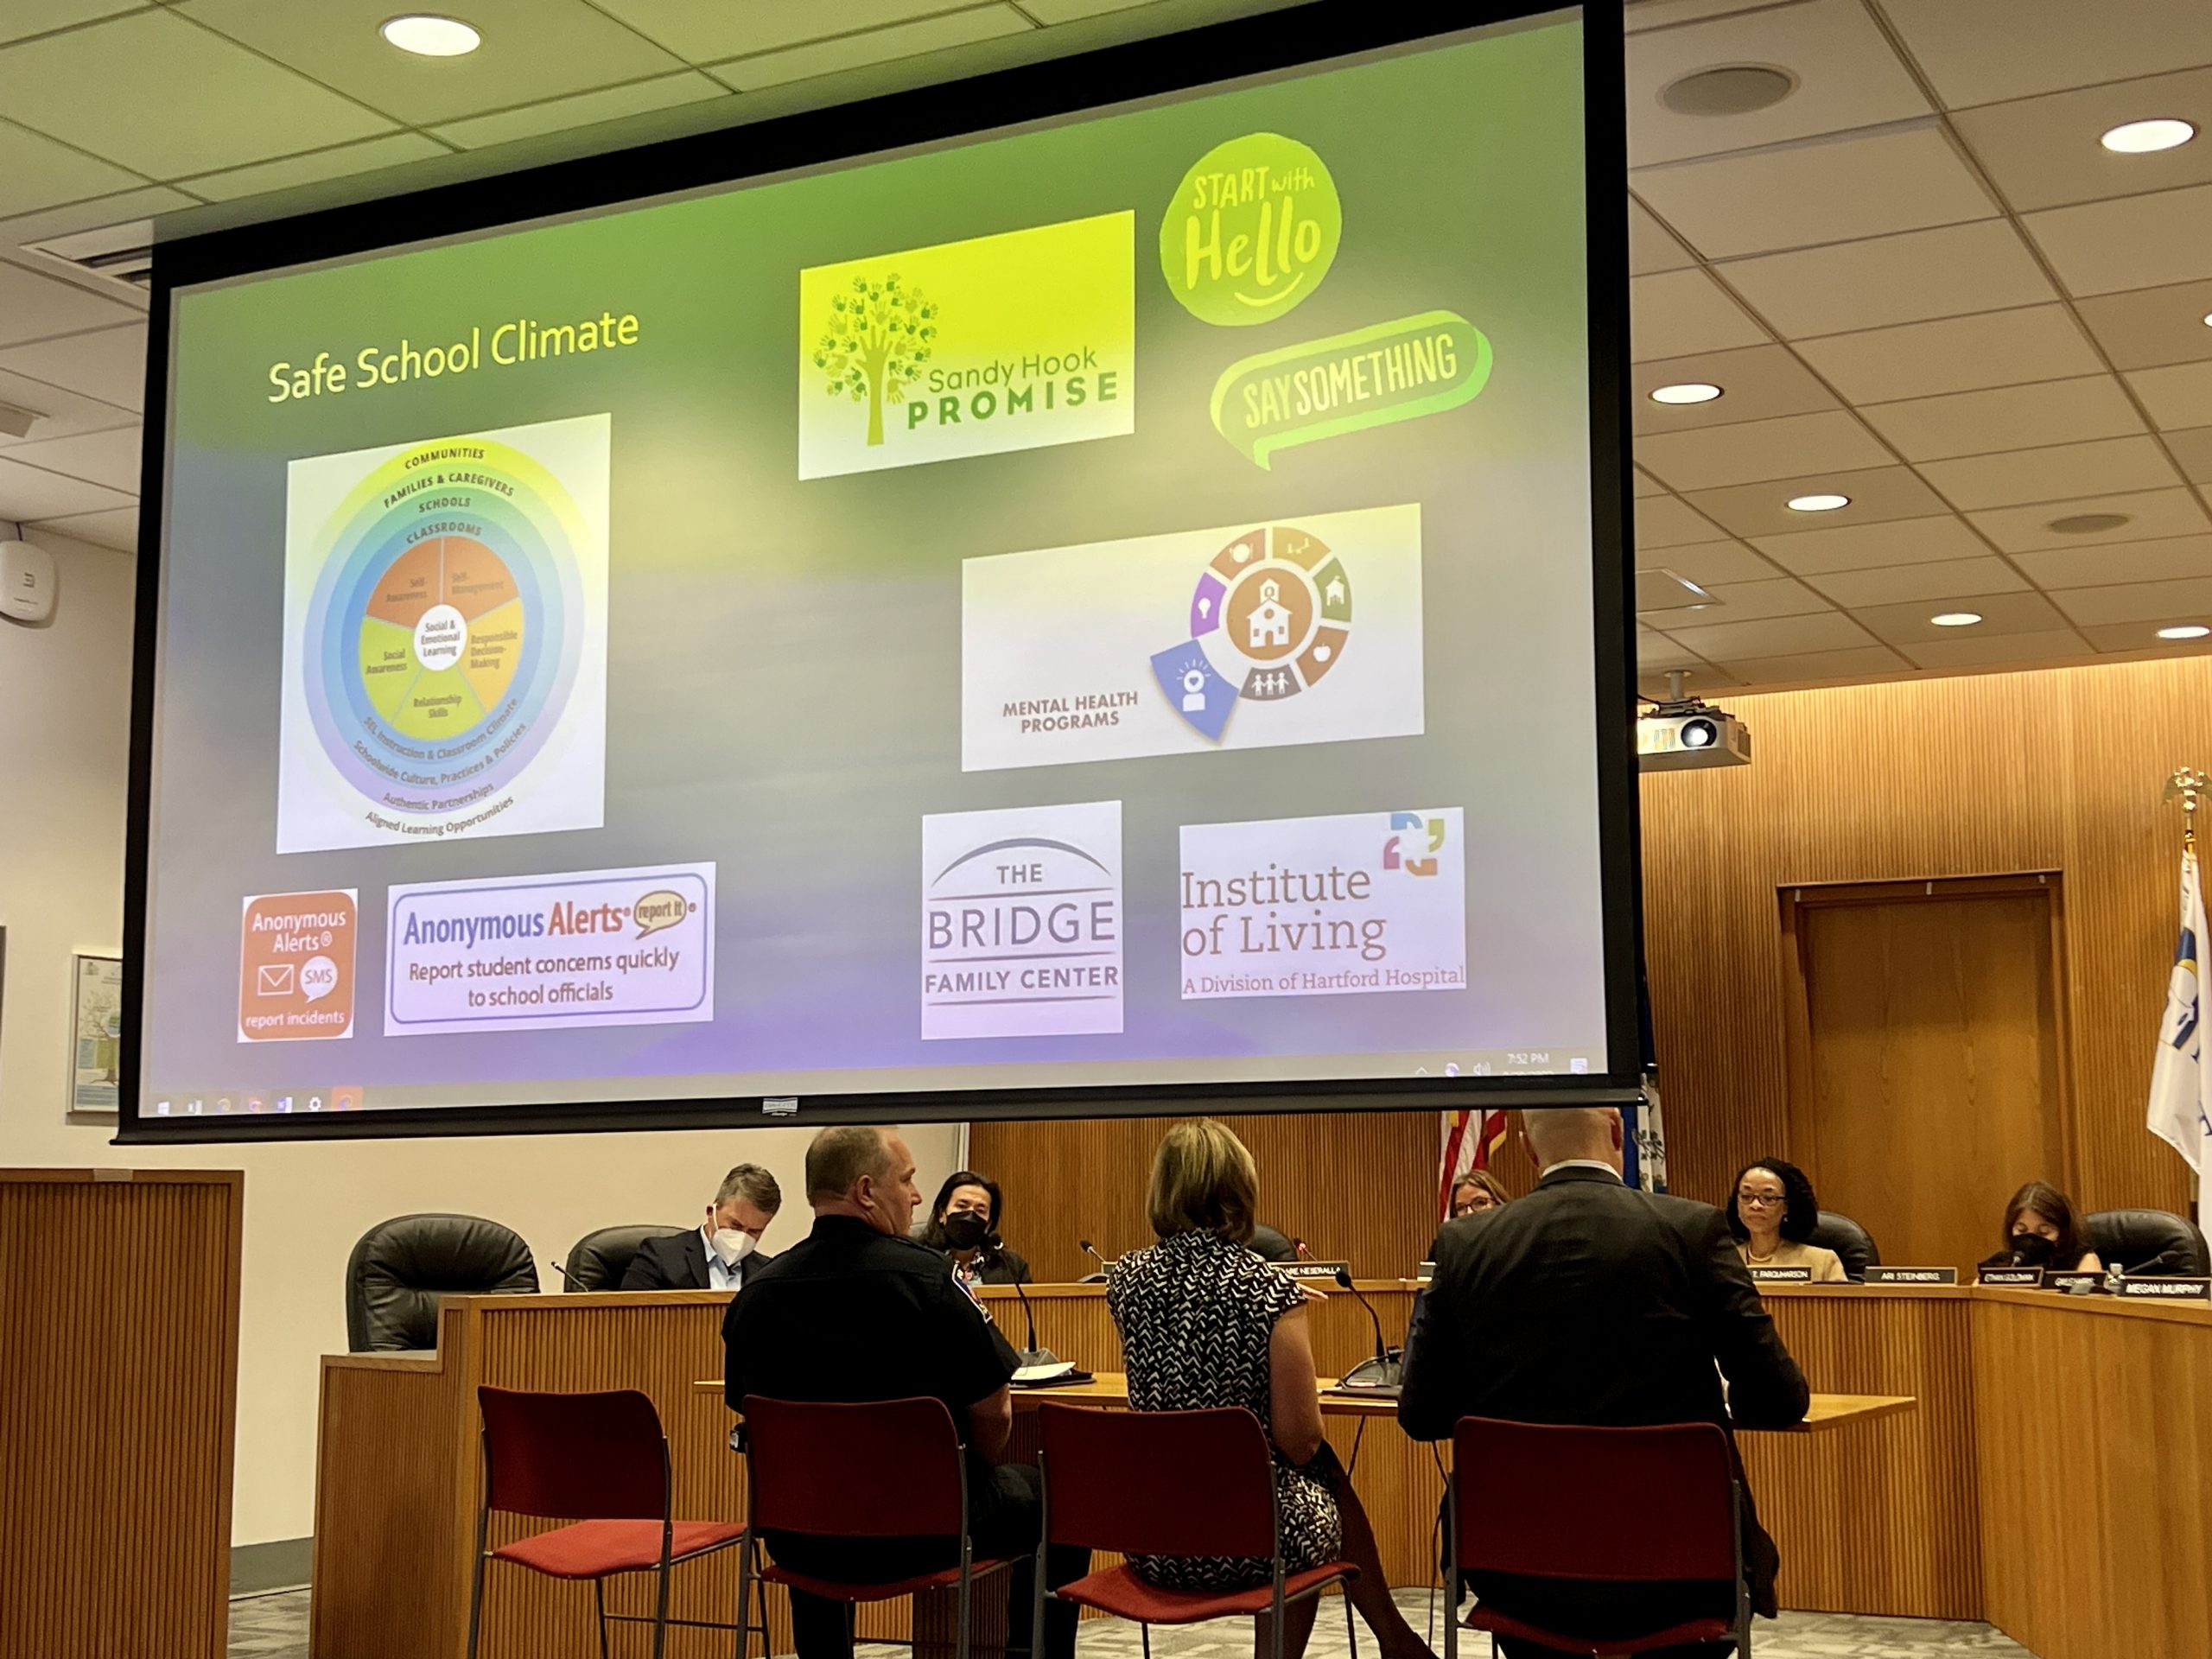 Partnerships and Physical Security Highlighted as Key to Safe Schools in West Hartford - http://www.we-ha.com